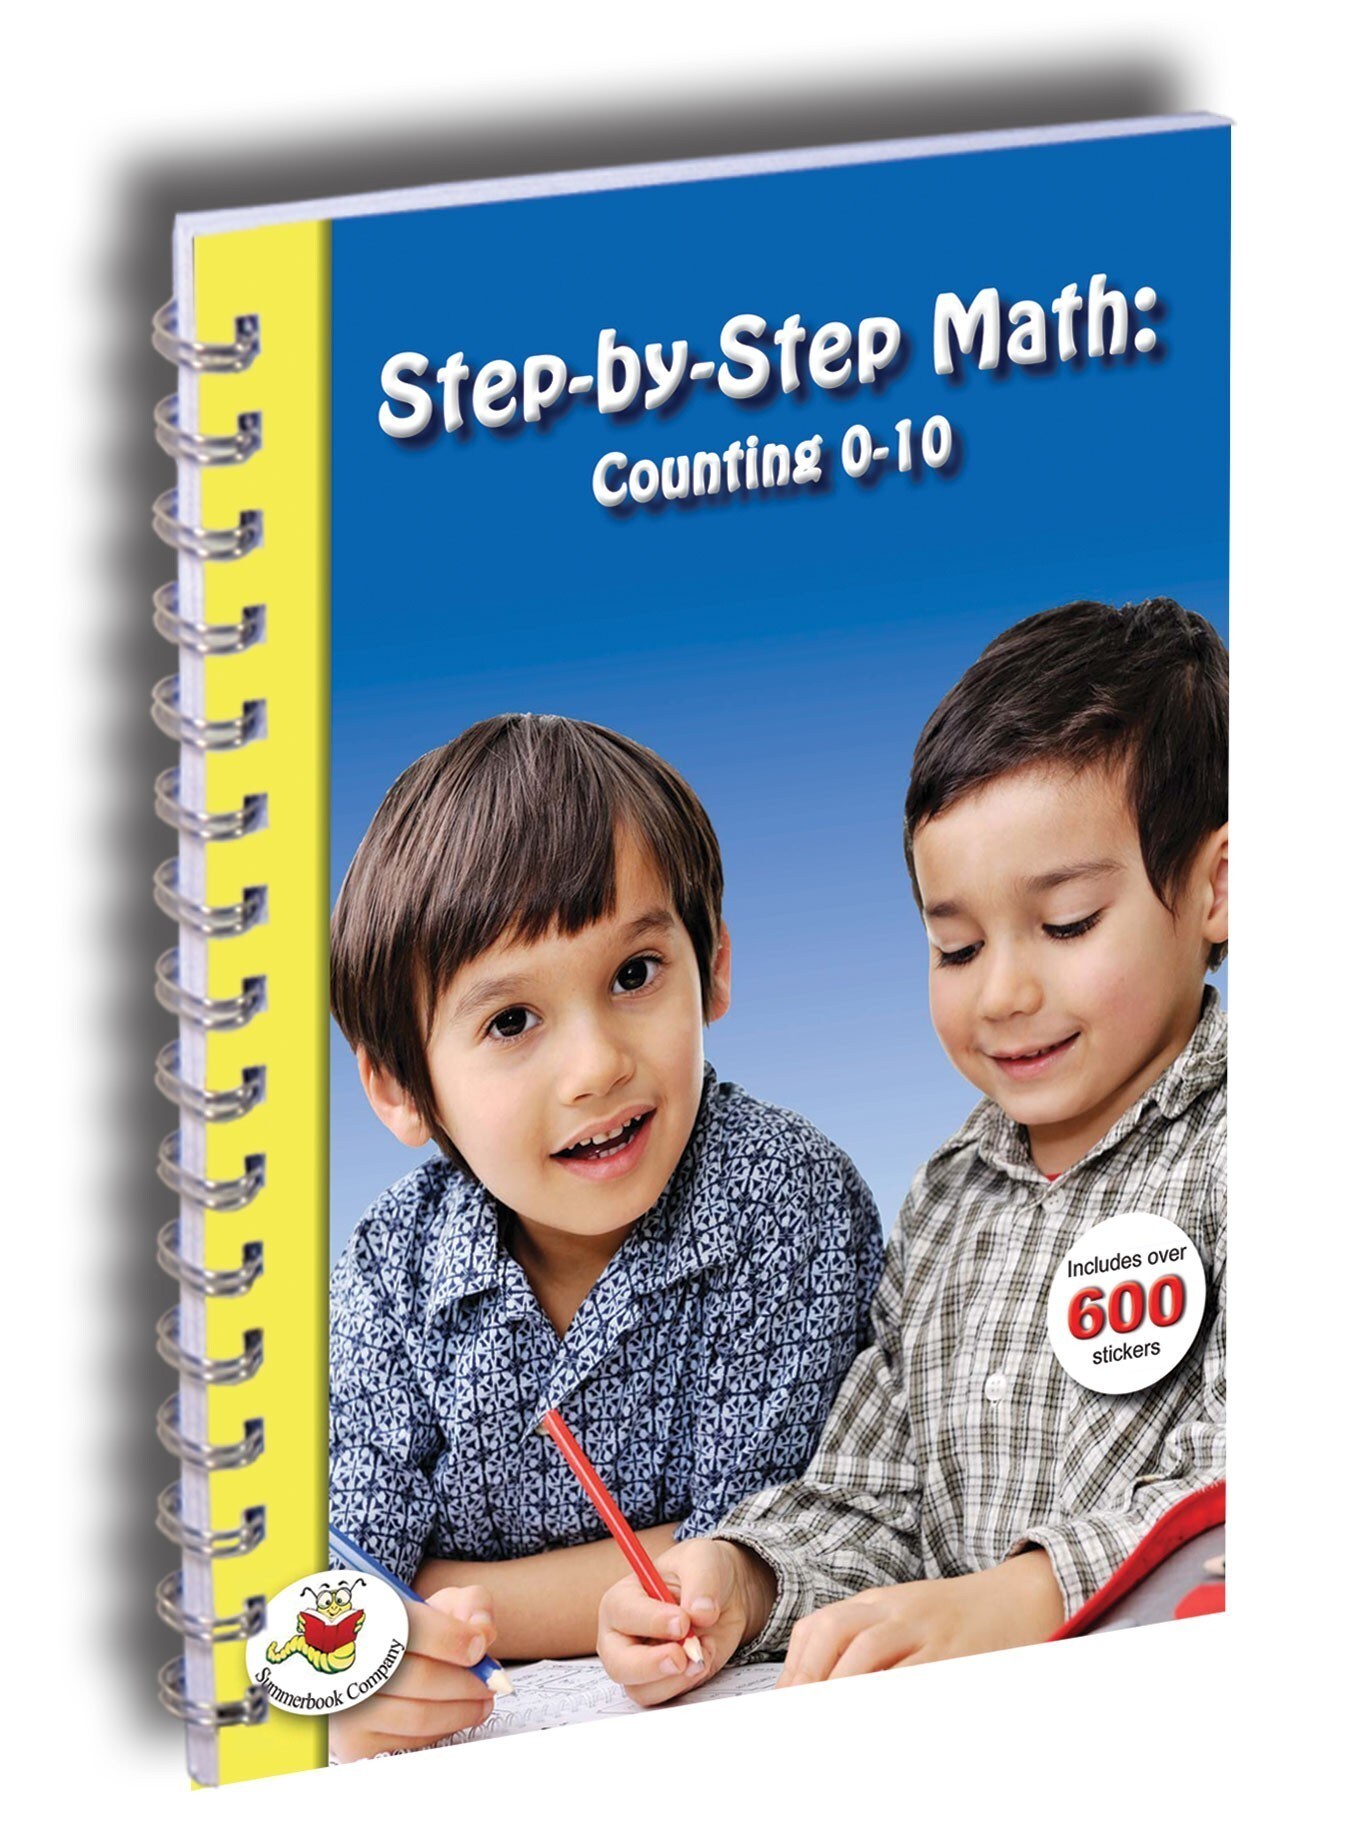 Step-by-Step Math: Counting 0 to 10 - book with over 600 stickers